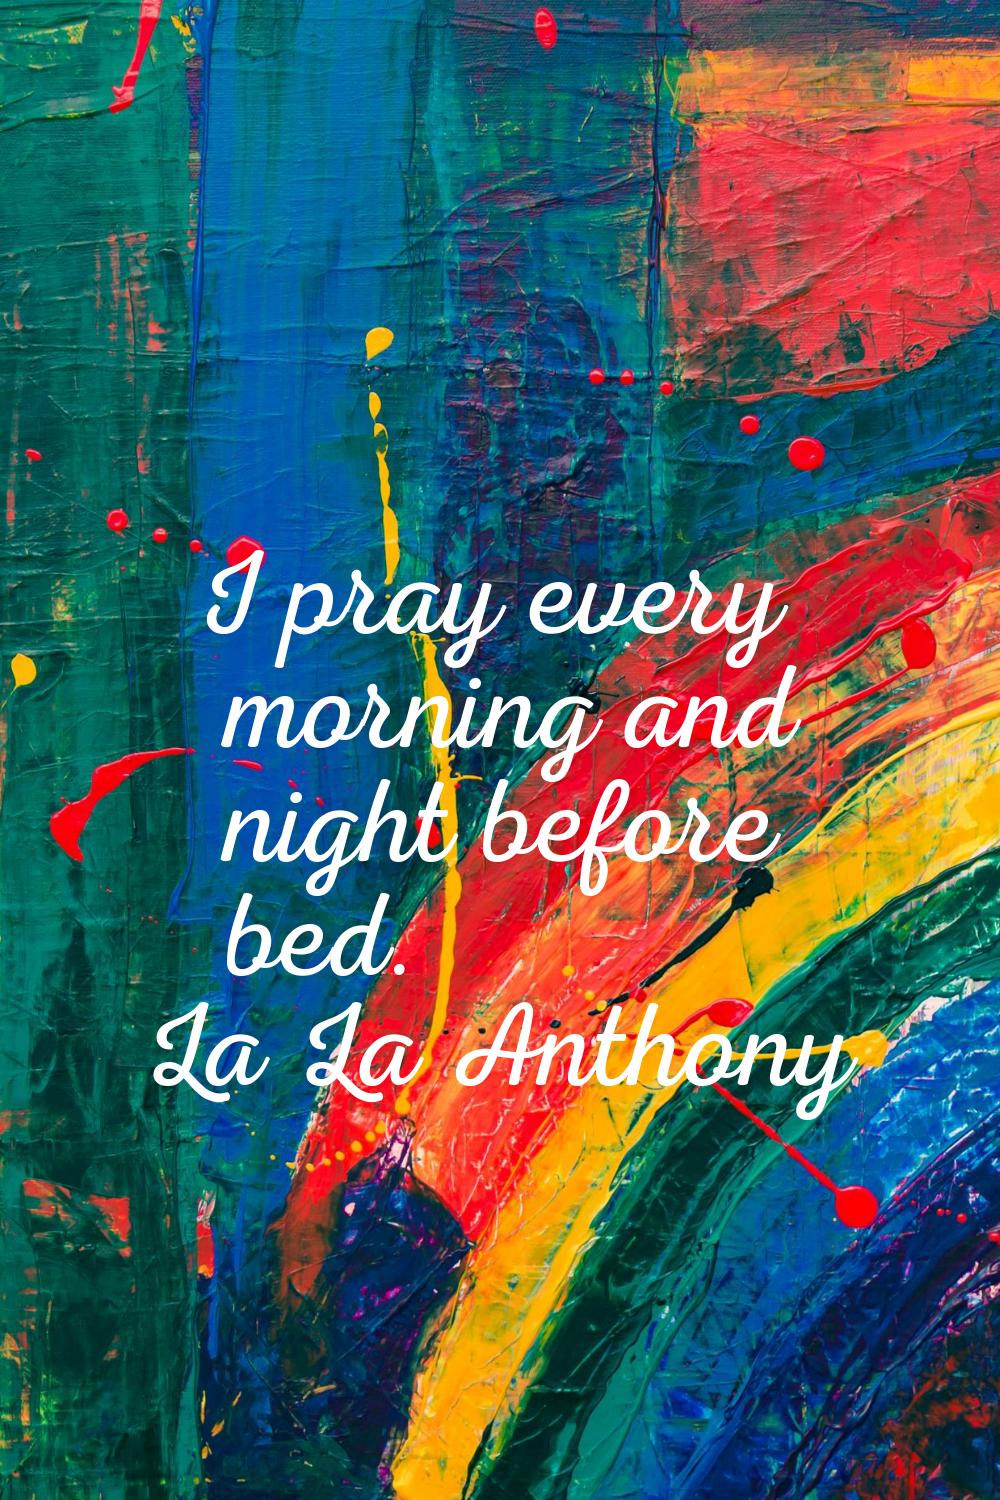 I pray every morning and night before bed.